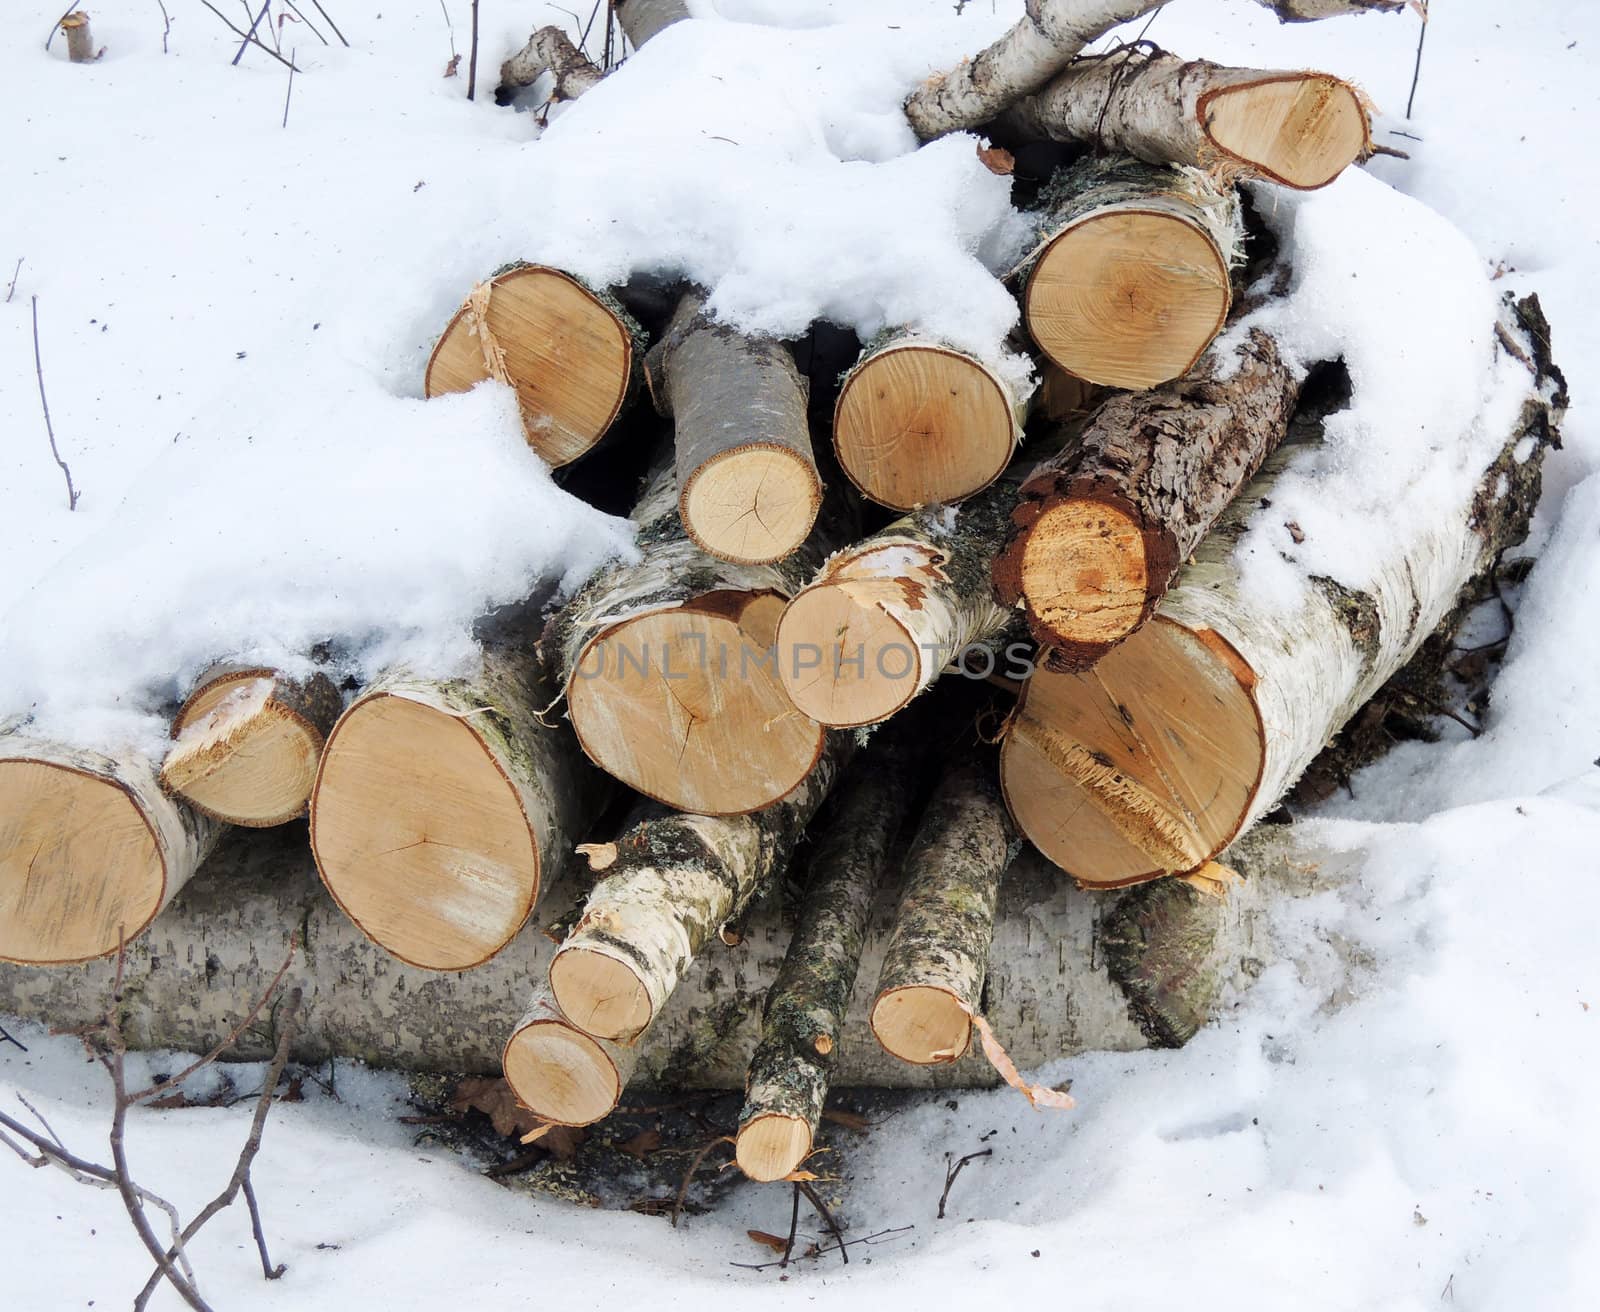 Wood pile with snow in forest by MalyDesigner